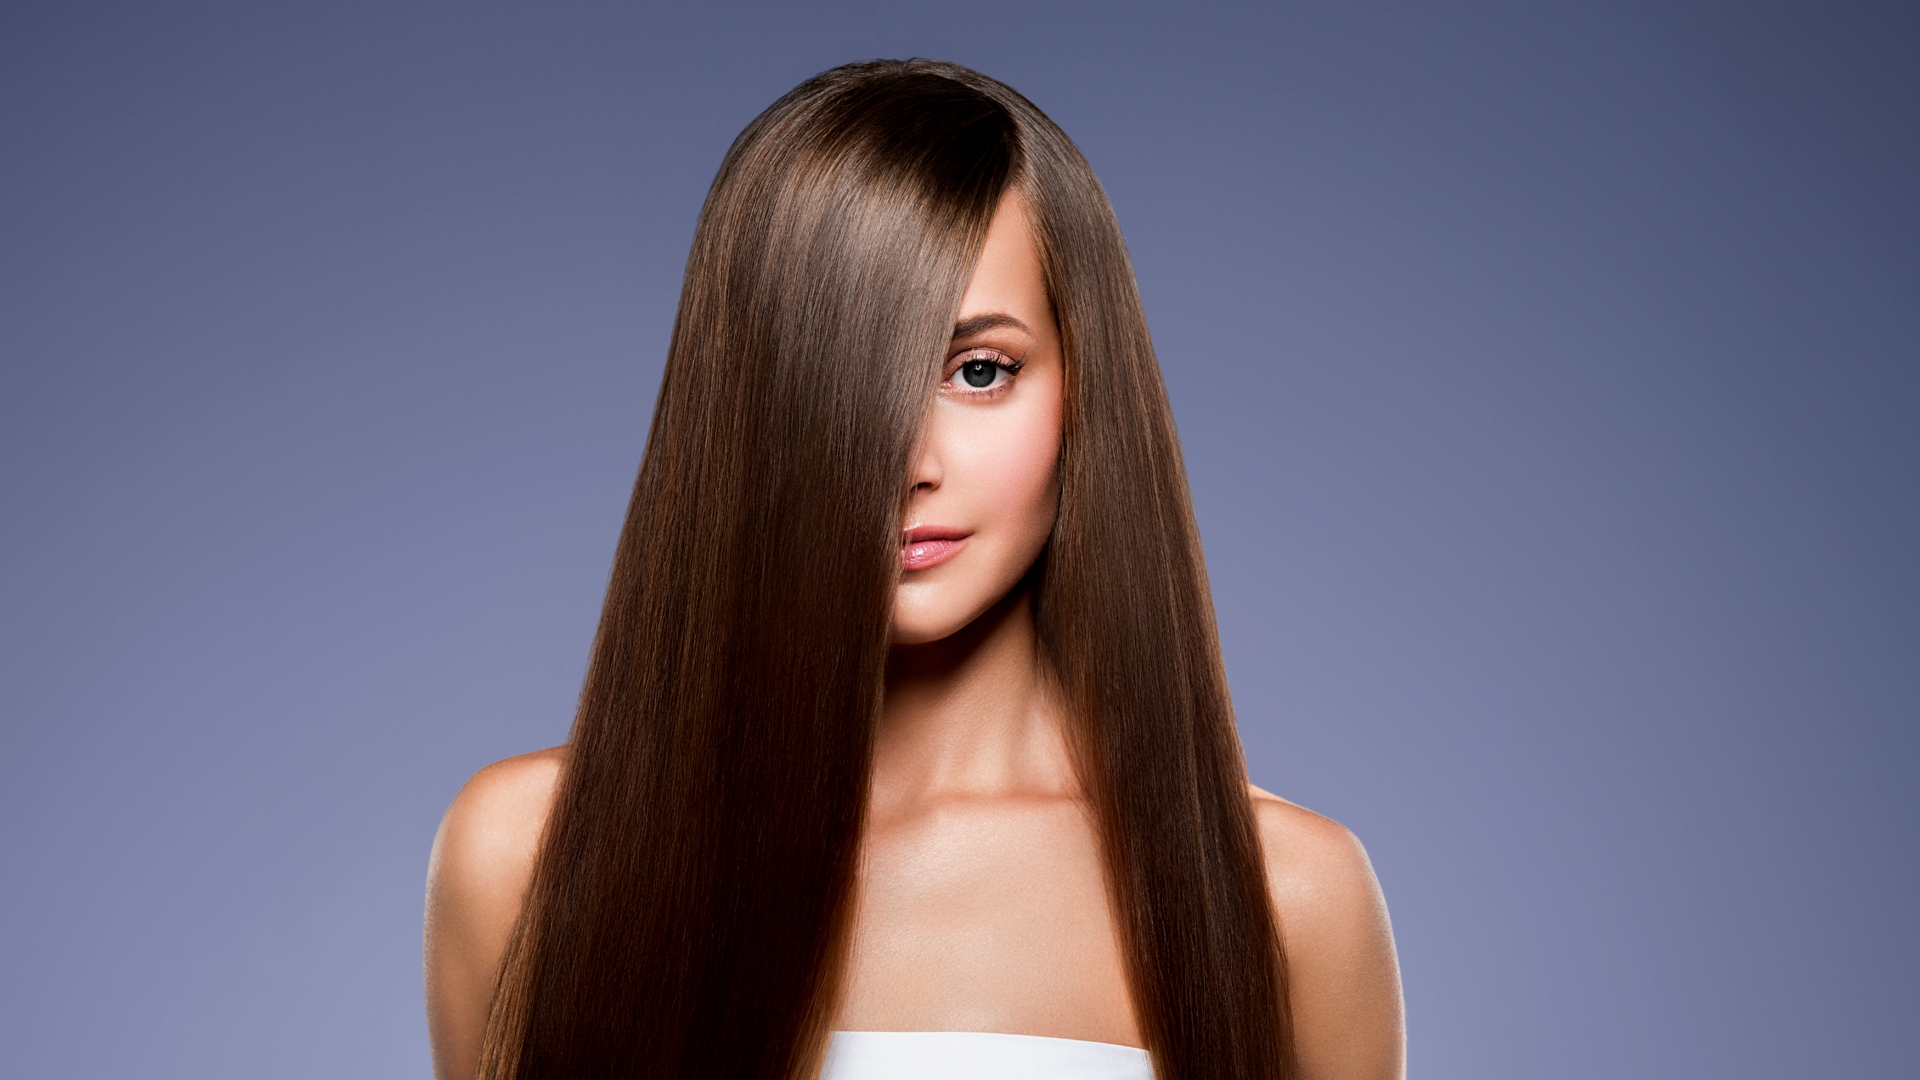 List of Bubbles Services With Benefits – II - Keratin treatment - Bubbles